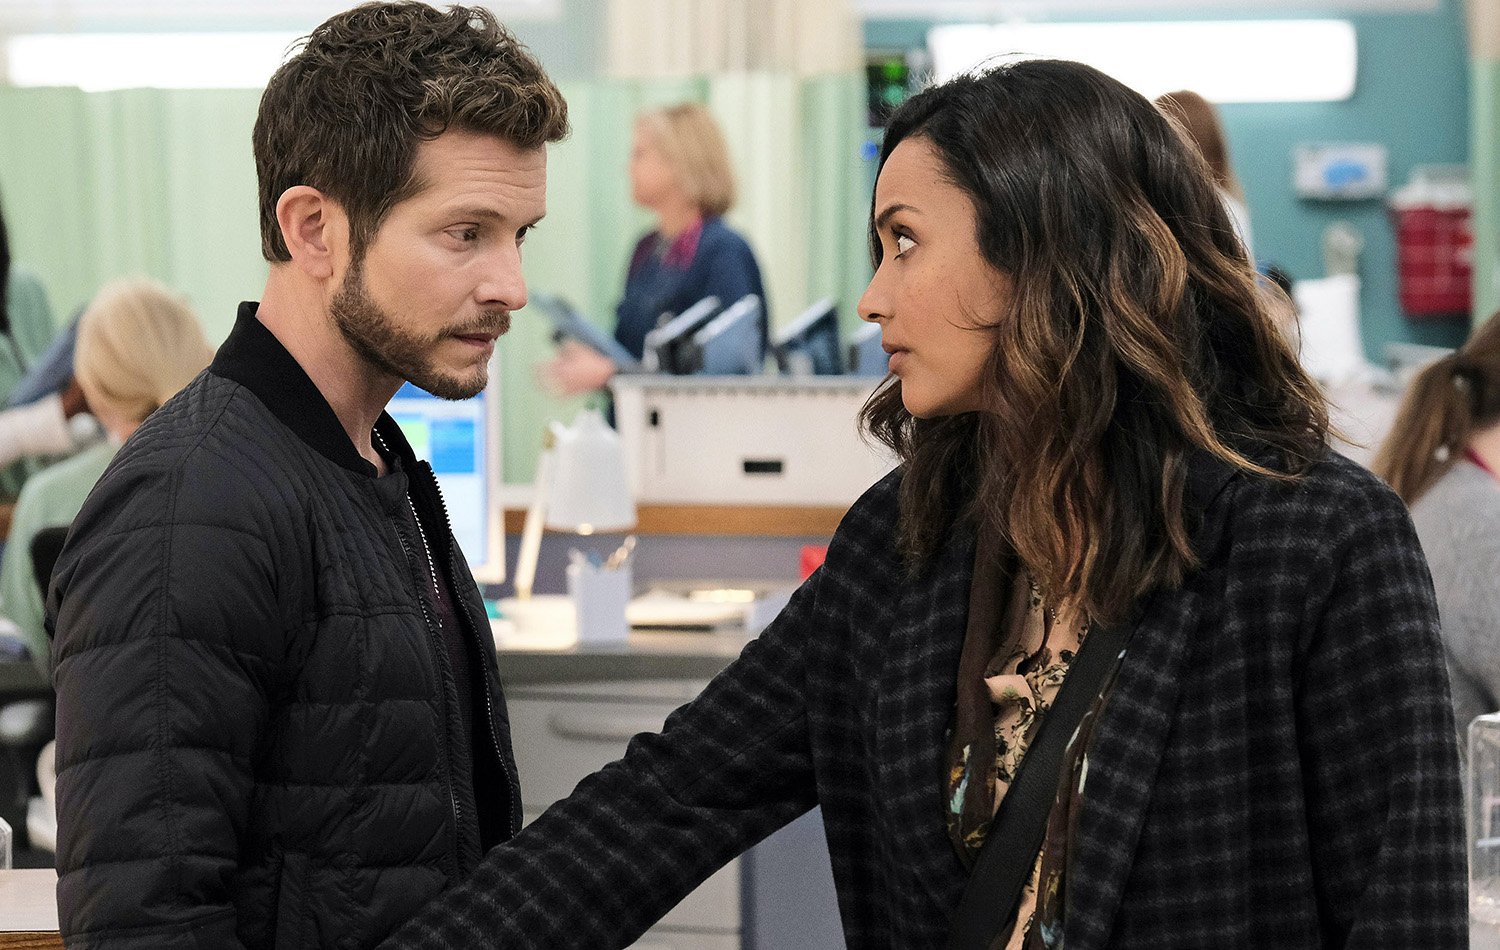 Matt Czuchry as Conrad and Jessica Lucas as Billie in The Resident, which will return to FOX after a brief hiatus on Oct 26.